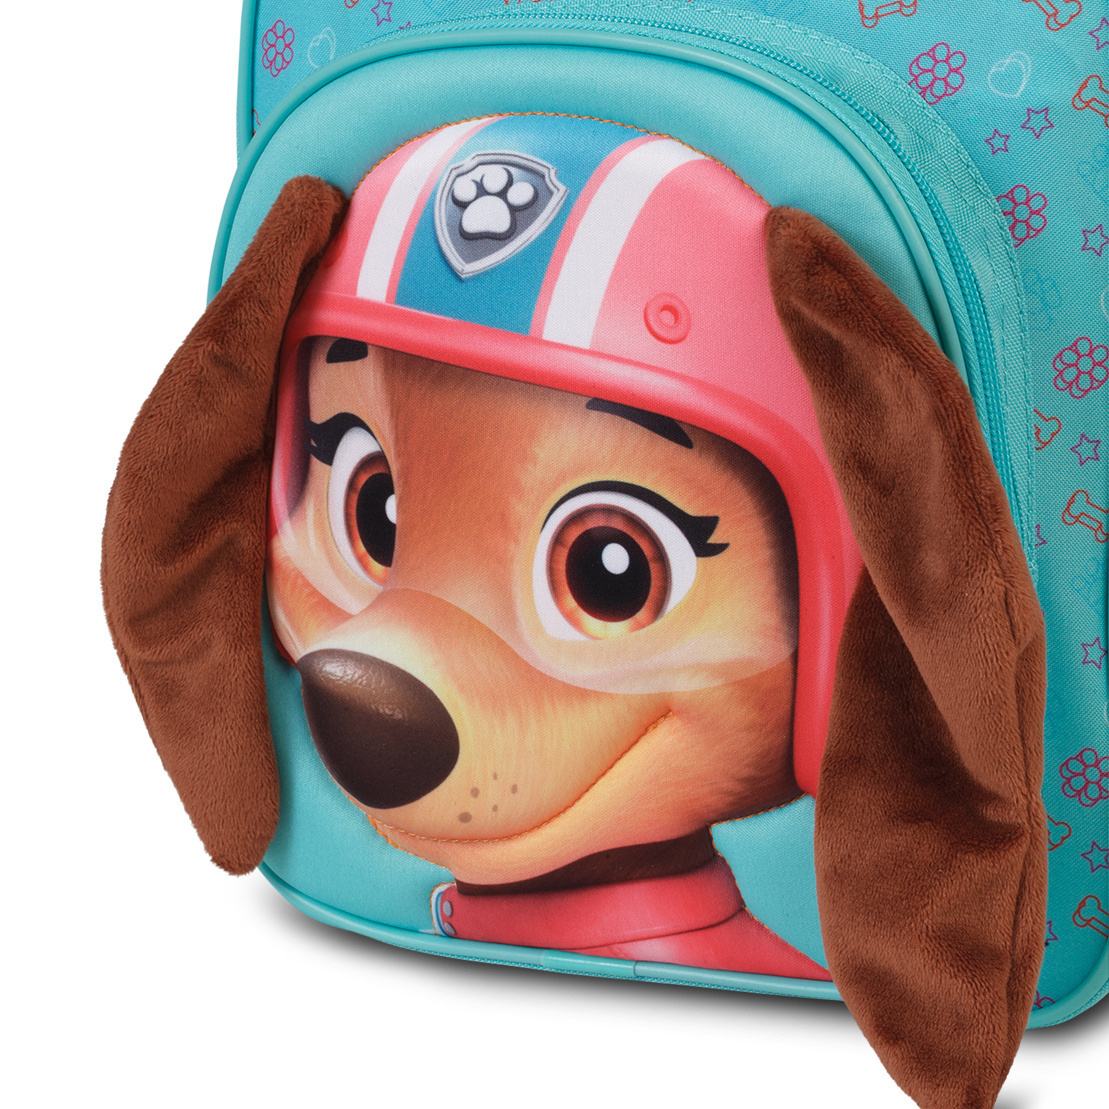 Paw Patrol Backpack Everest 3D - 31 x 24 x 13 cm - Polyester